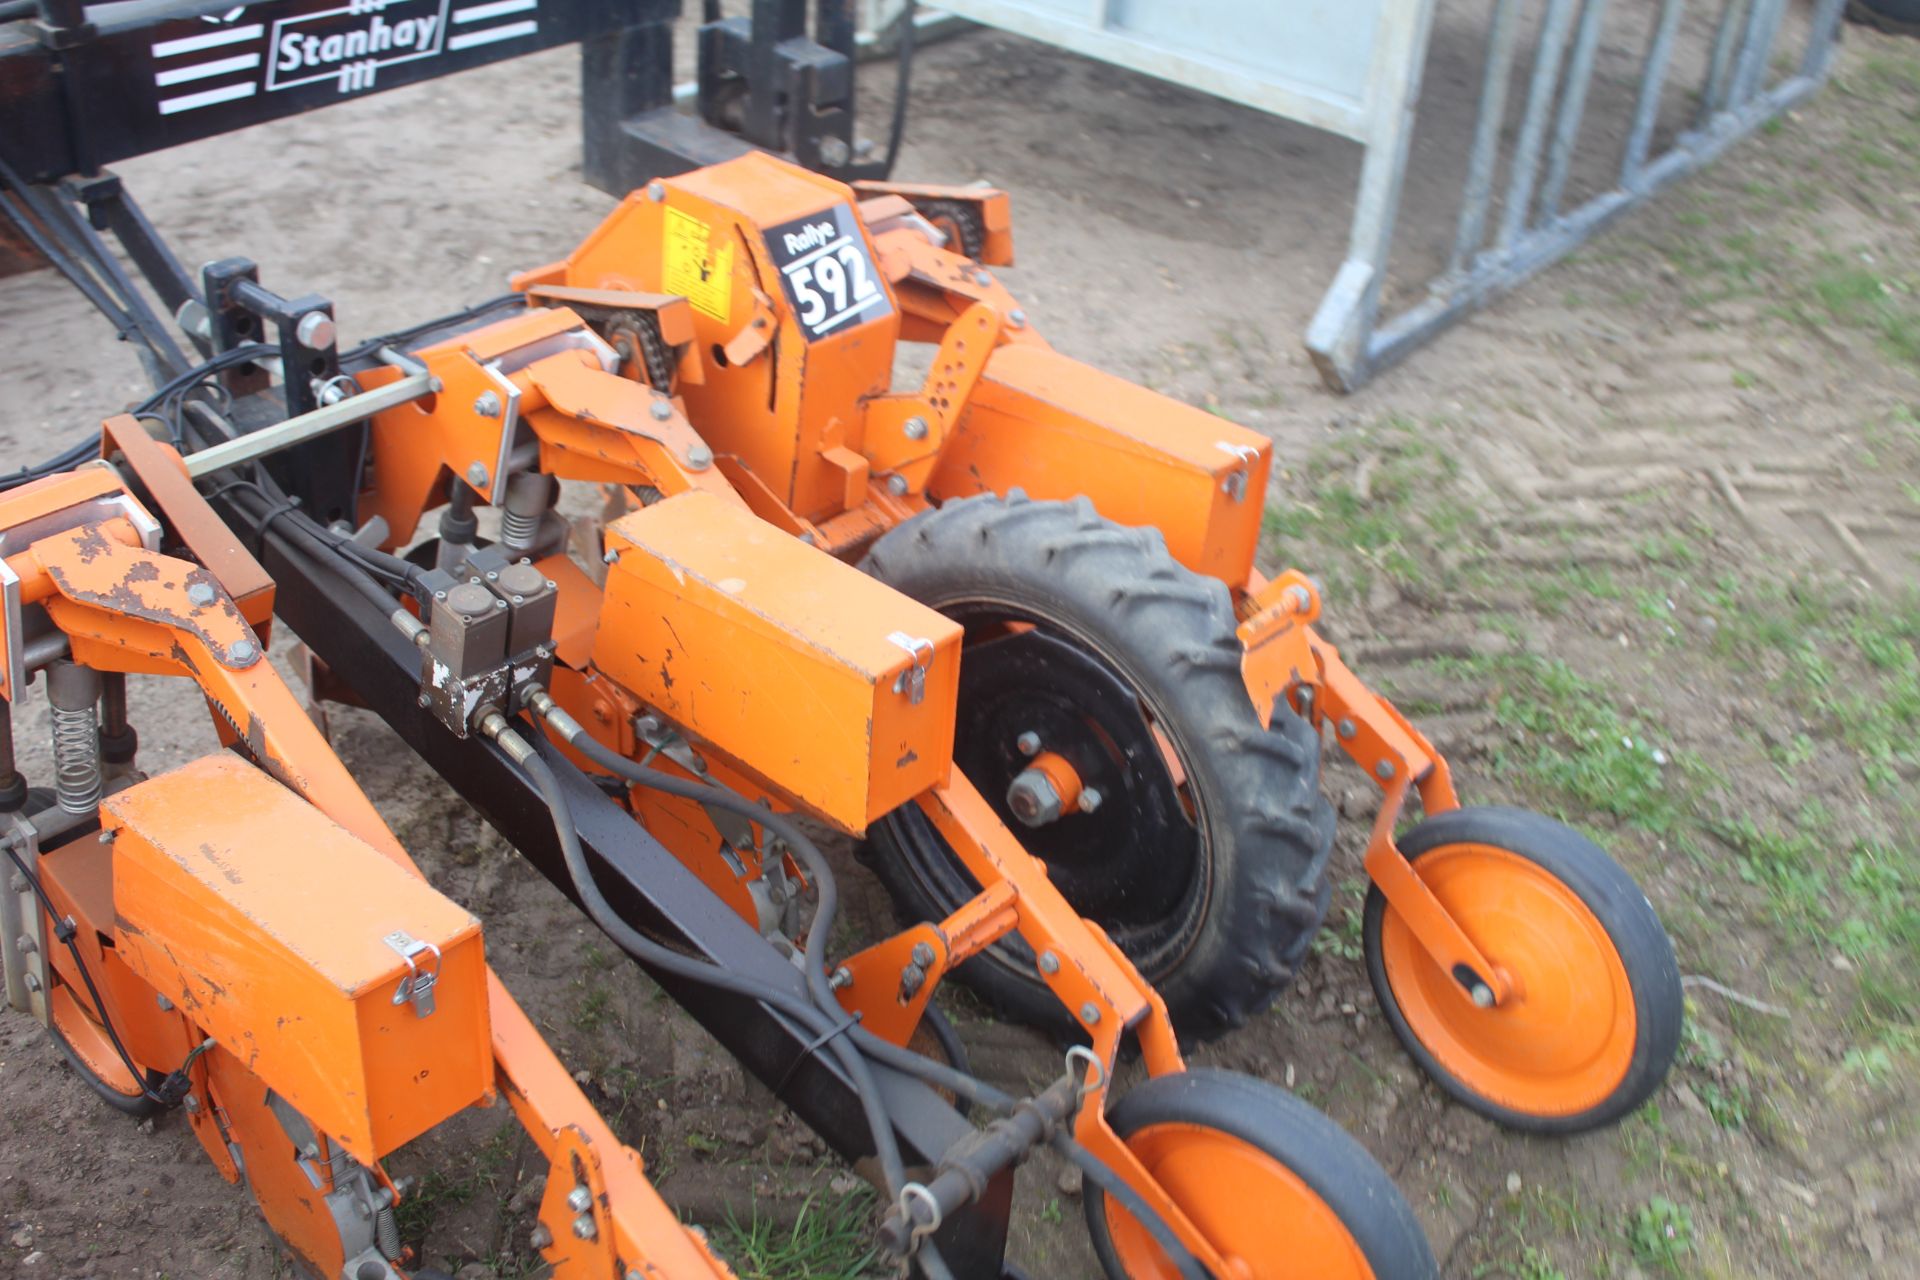 Stanhay Rallye 592 hdraulic folding 12 row beet drill. With bout markers. V - Bild 20 aus 28